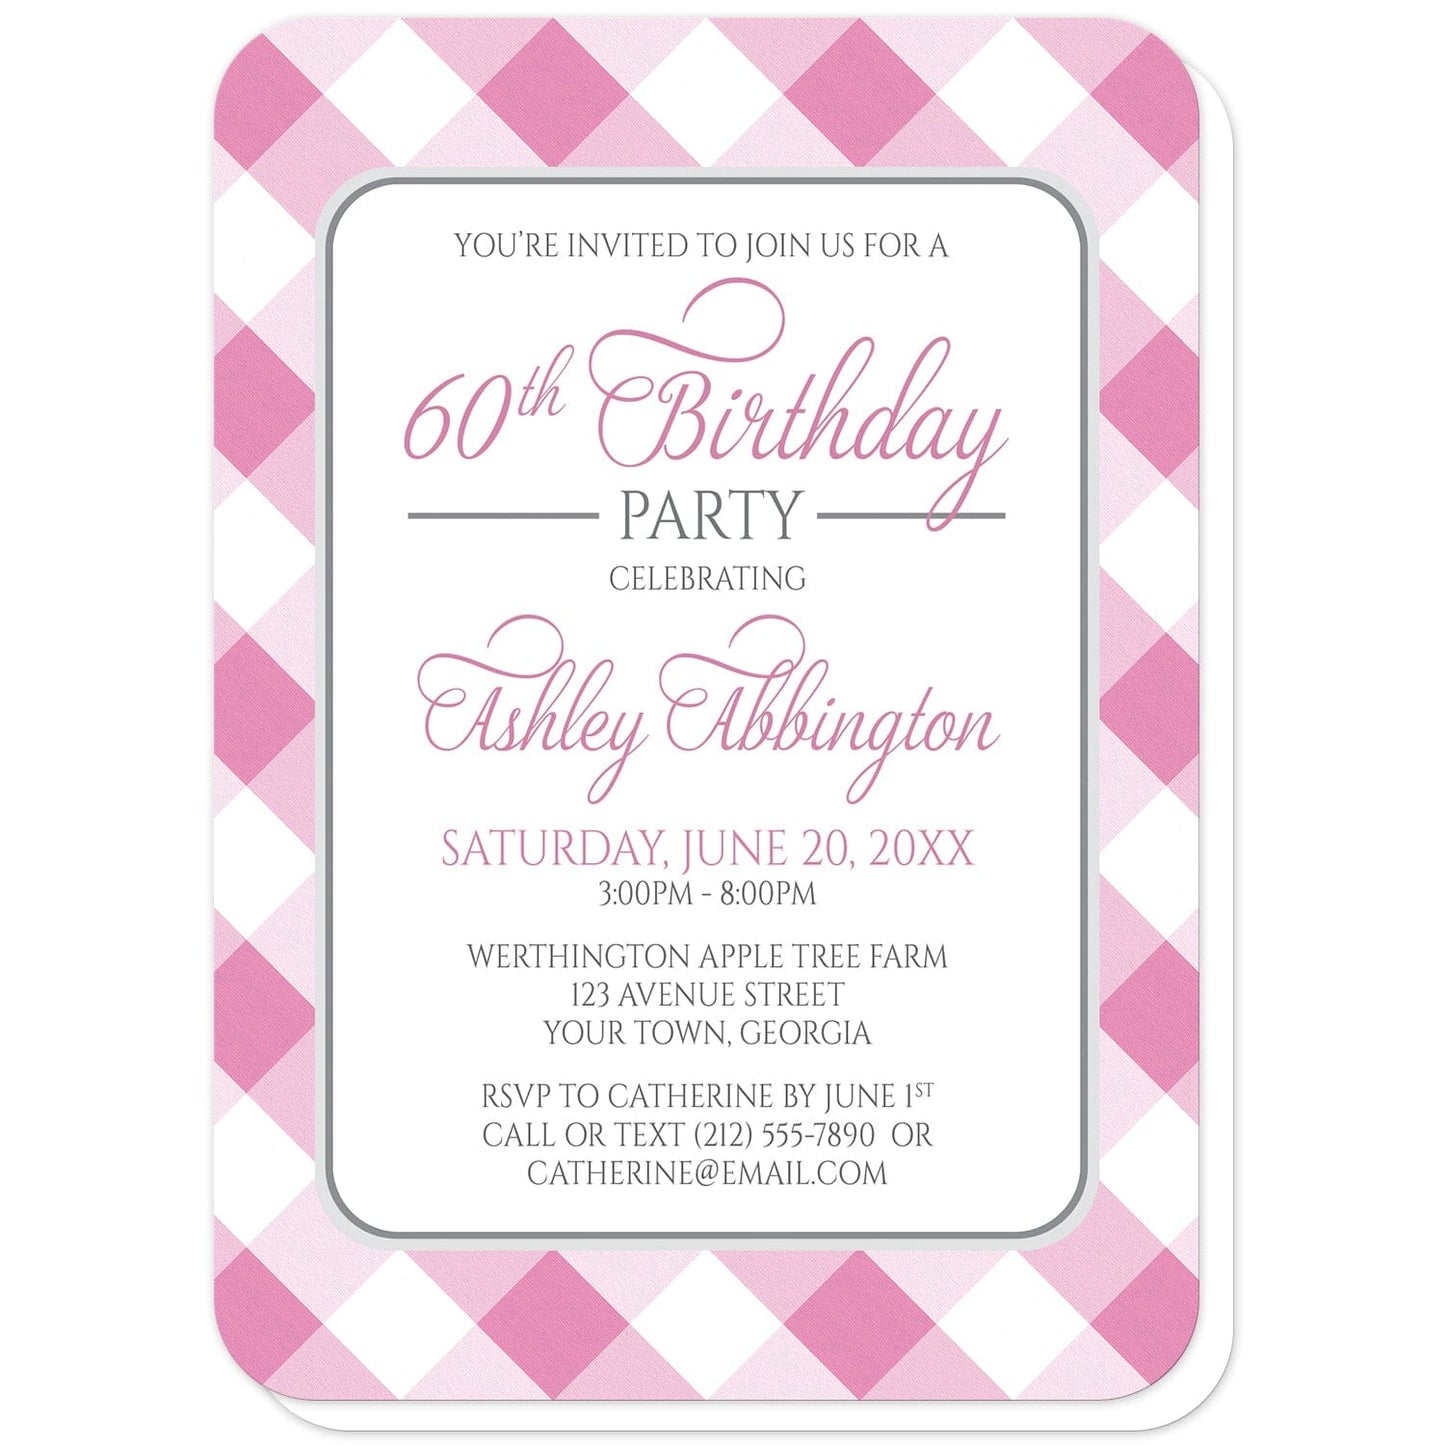 Pink Gingham Birthday Party Invitations (with rounded corners) at Artistically Invited. Pink gingham birthday party invitations with your personalized party details custom printed in pink and gray inside a white rectangular area outlined in gray. The background design is a diagonal pink and white gingham pattern. 